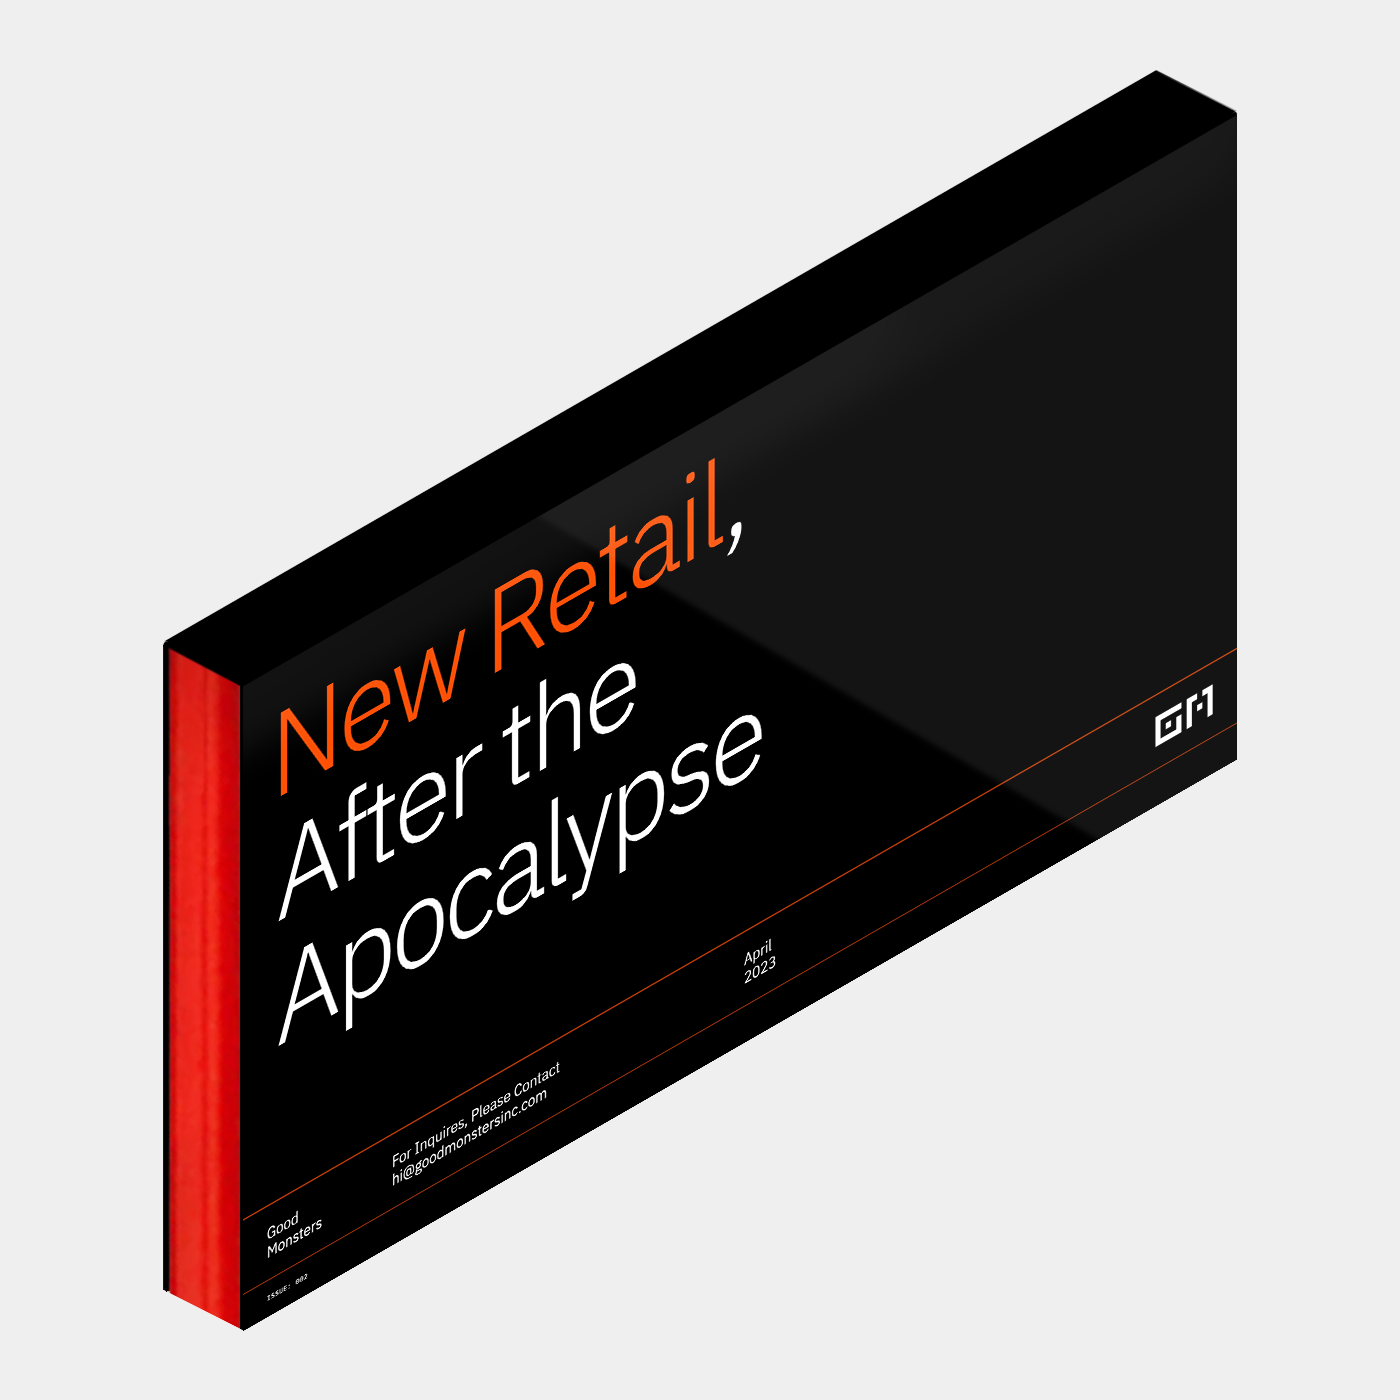 Issue 002: New Retail, After the Apocalypse